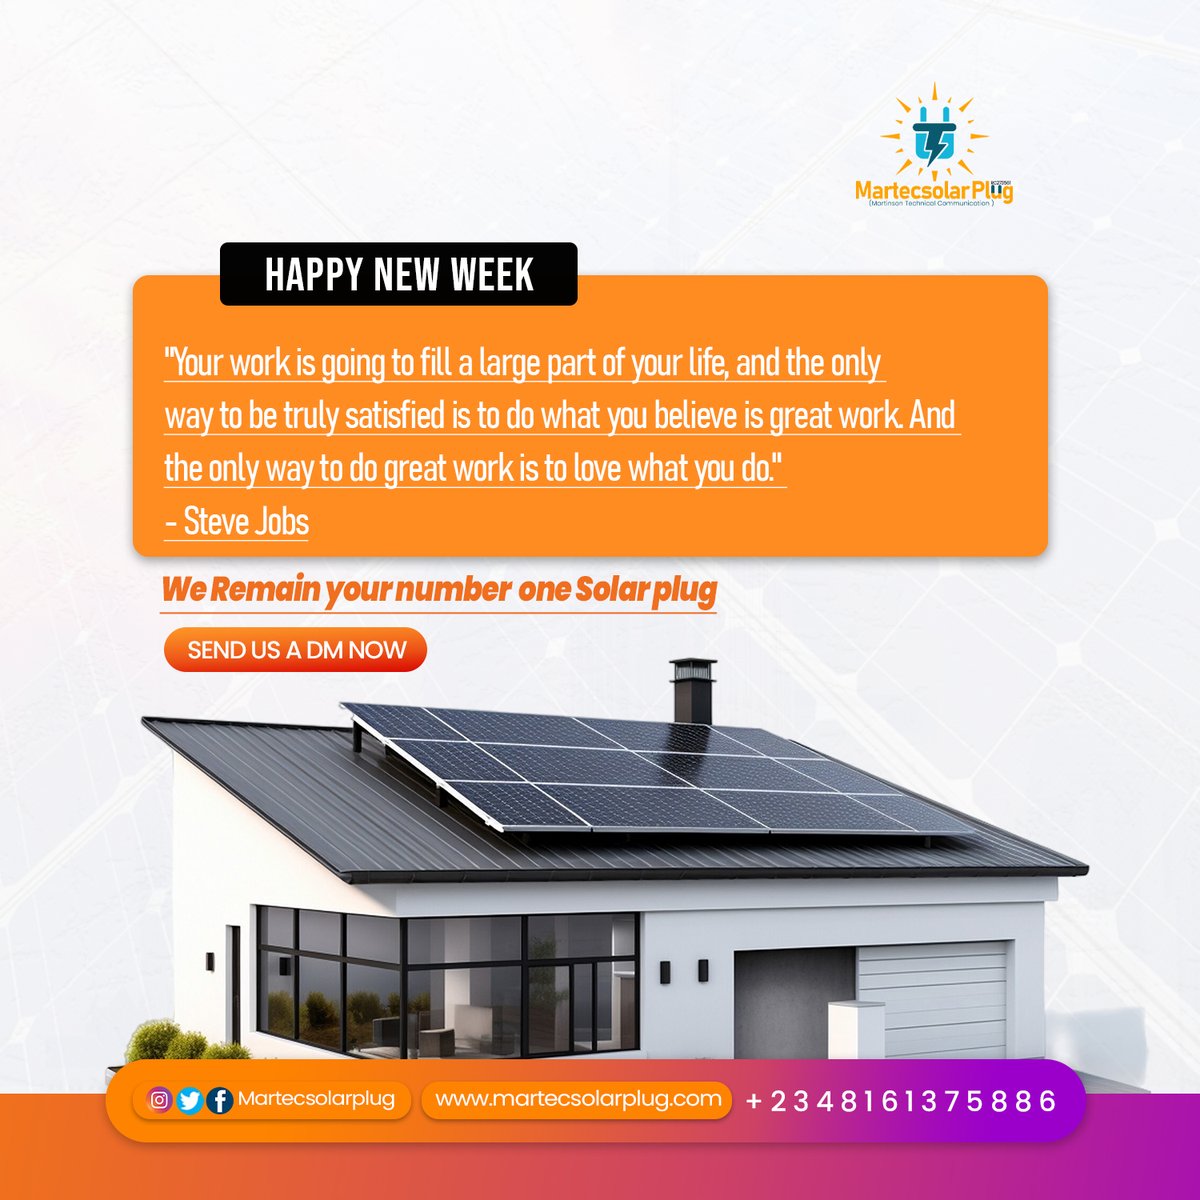 Happy new week
'Your work is going to fill a large part of your life, and the onlyway to be truly satisfied is to do what you believe is great work. And the only way to do great work is to love what you do.'
We Remain your number  one Solar plug!
#solar #martecsolarplug #solar